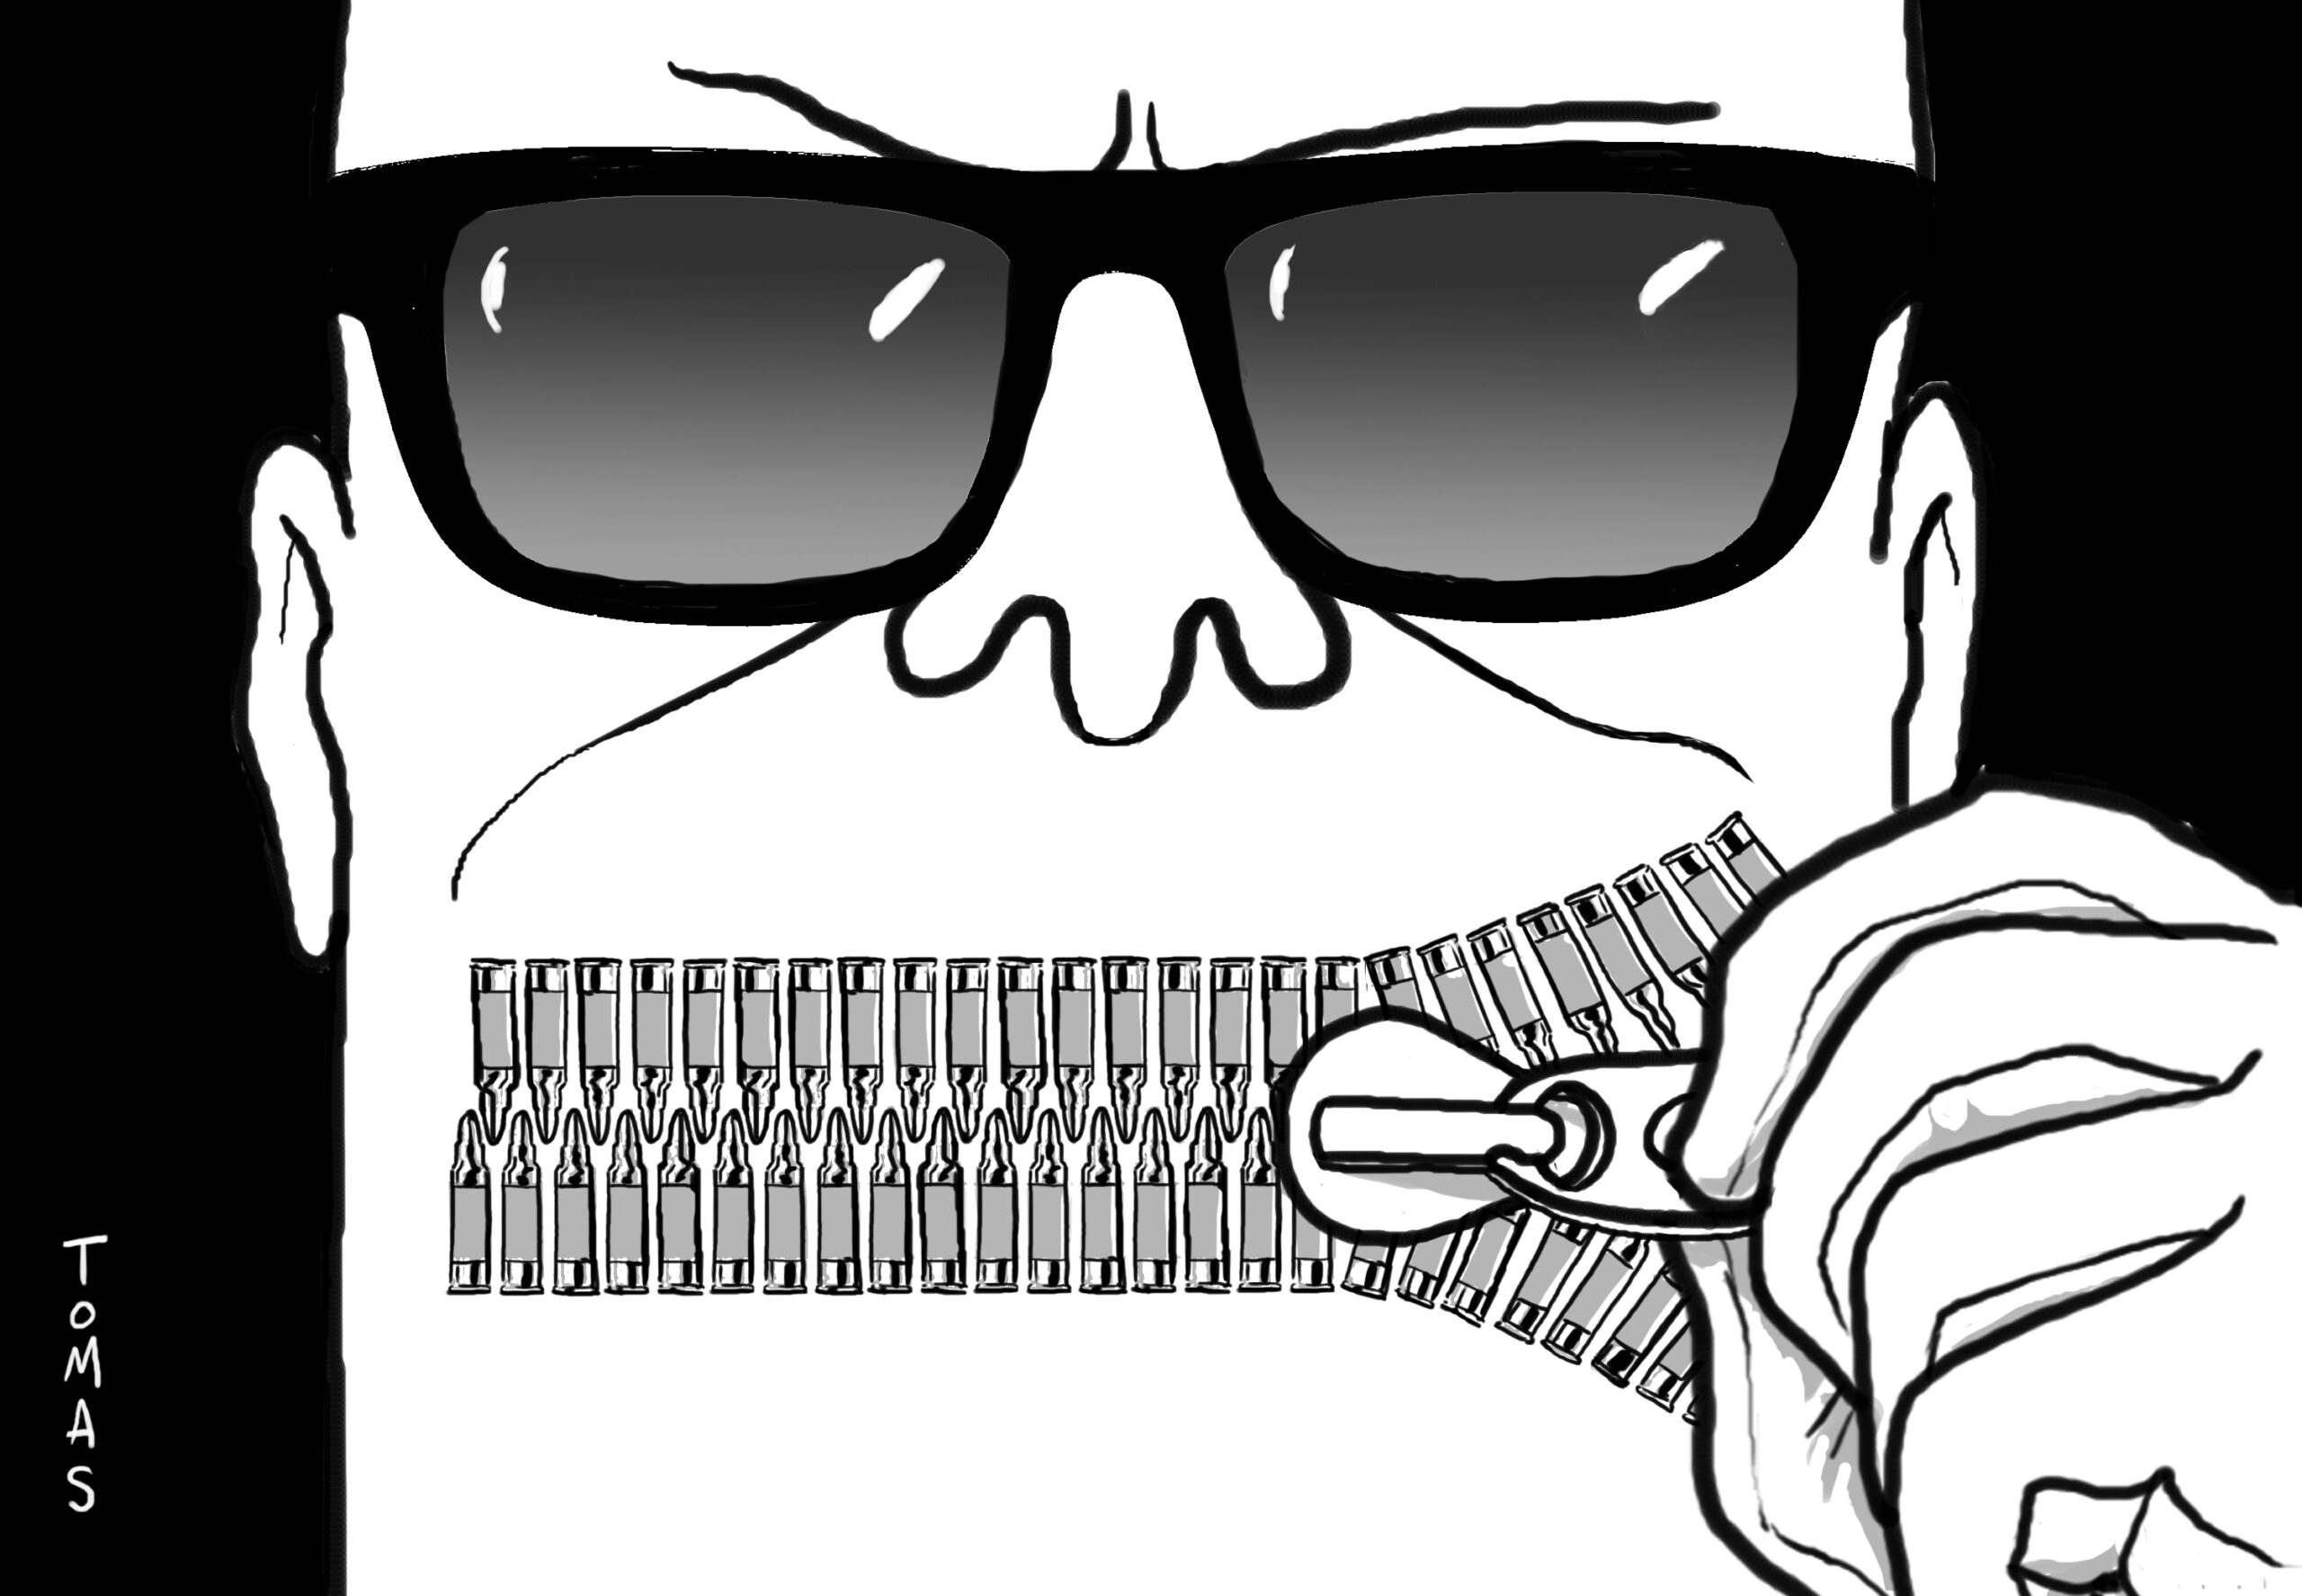 Black and white sketch of a man with sunglasses, zippering his mouth shut.